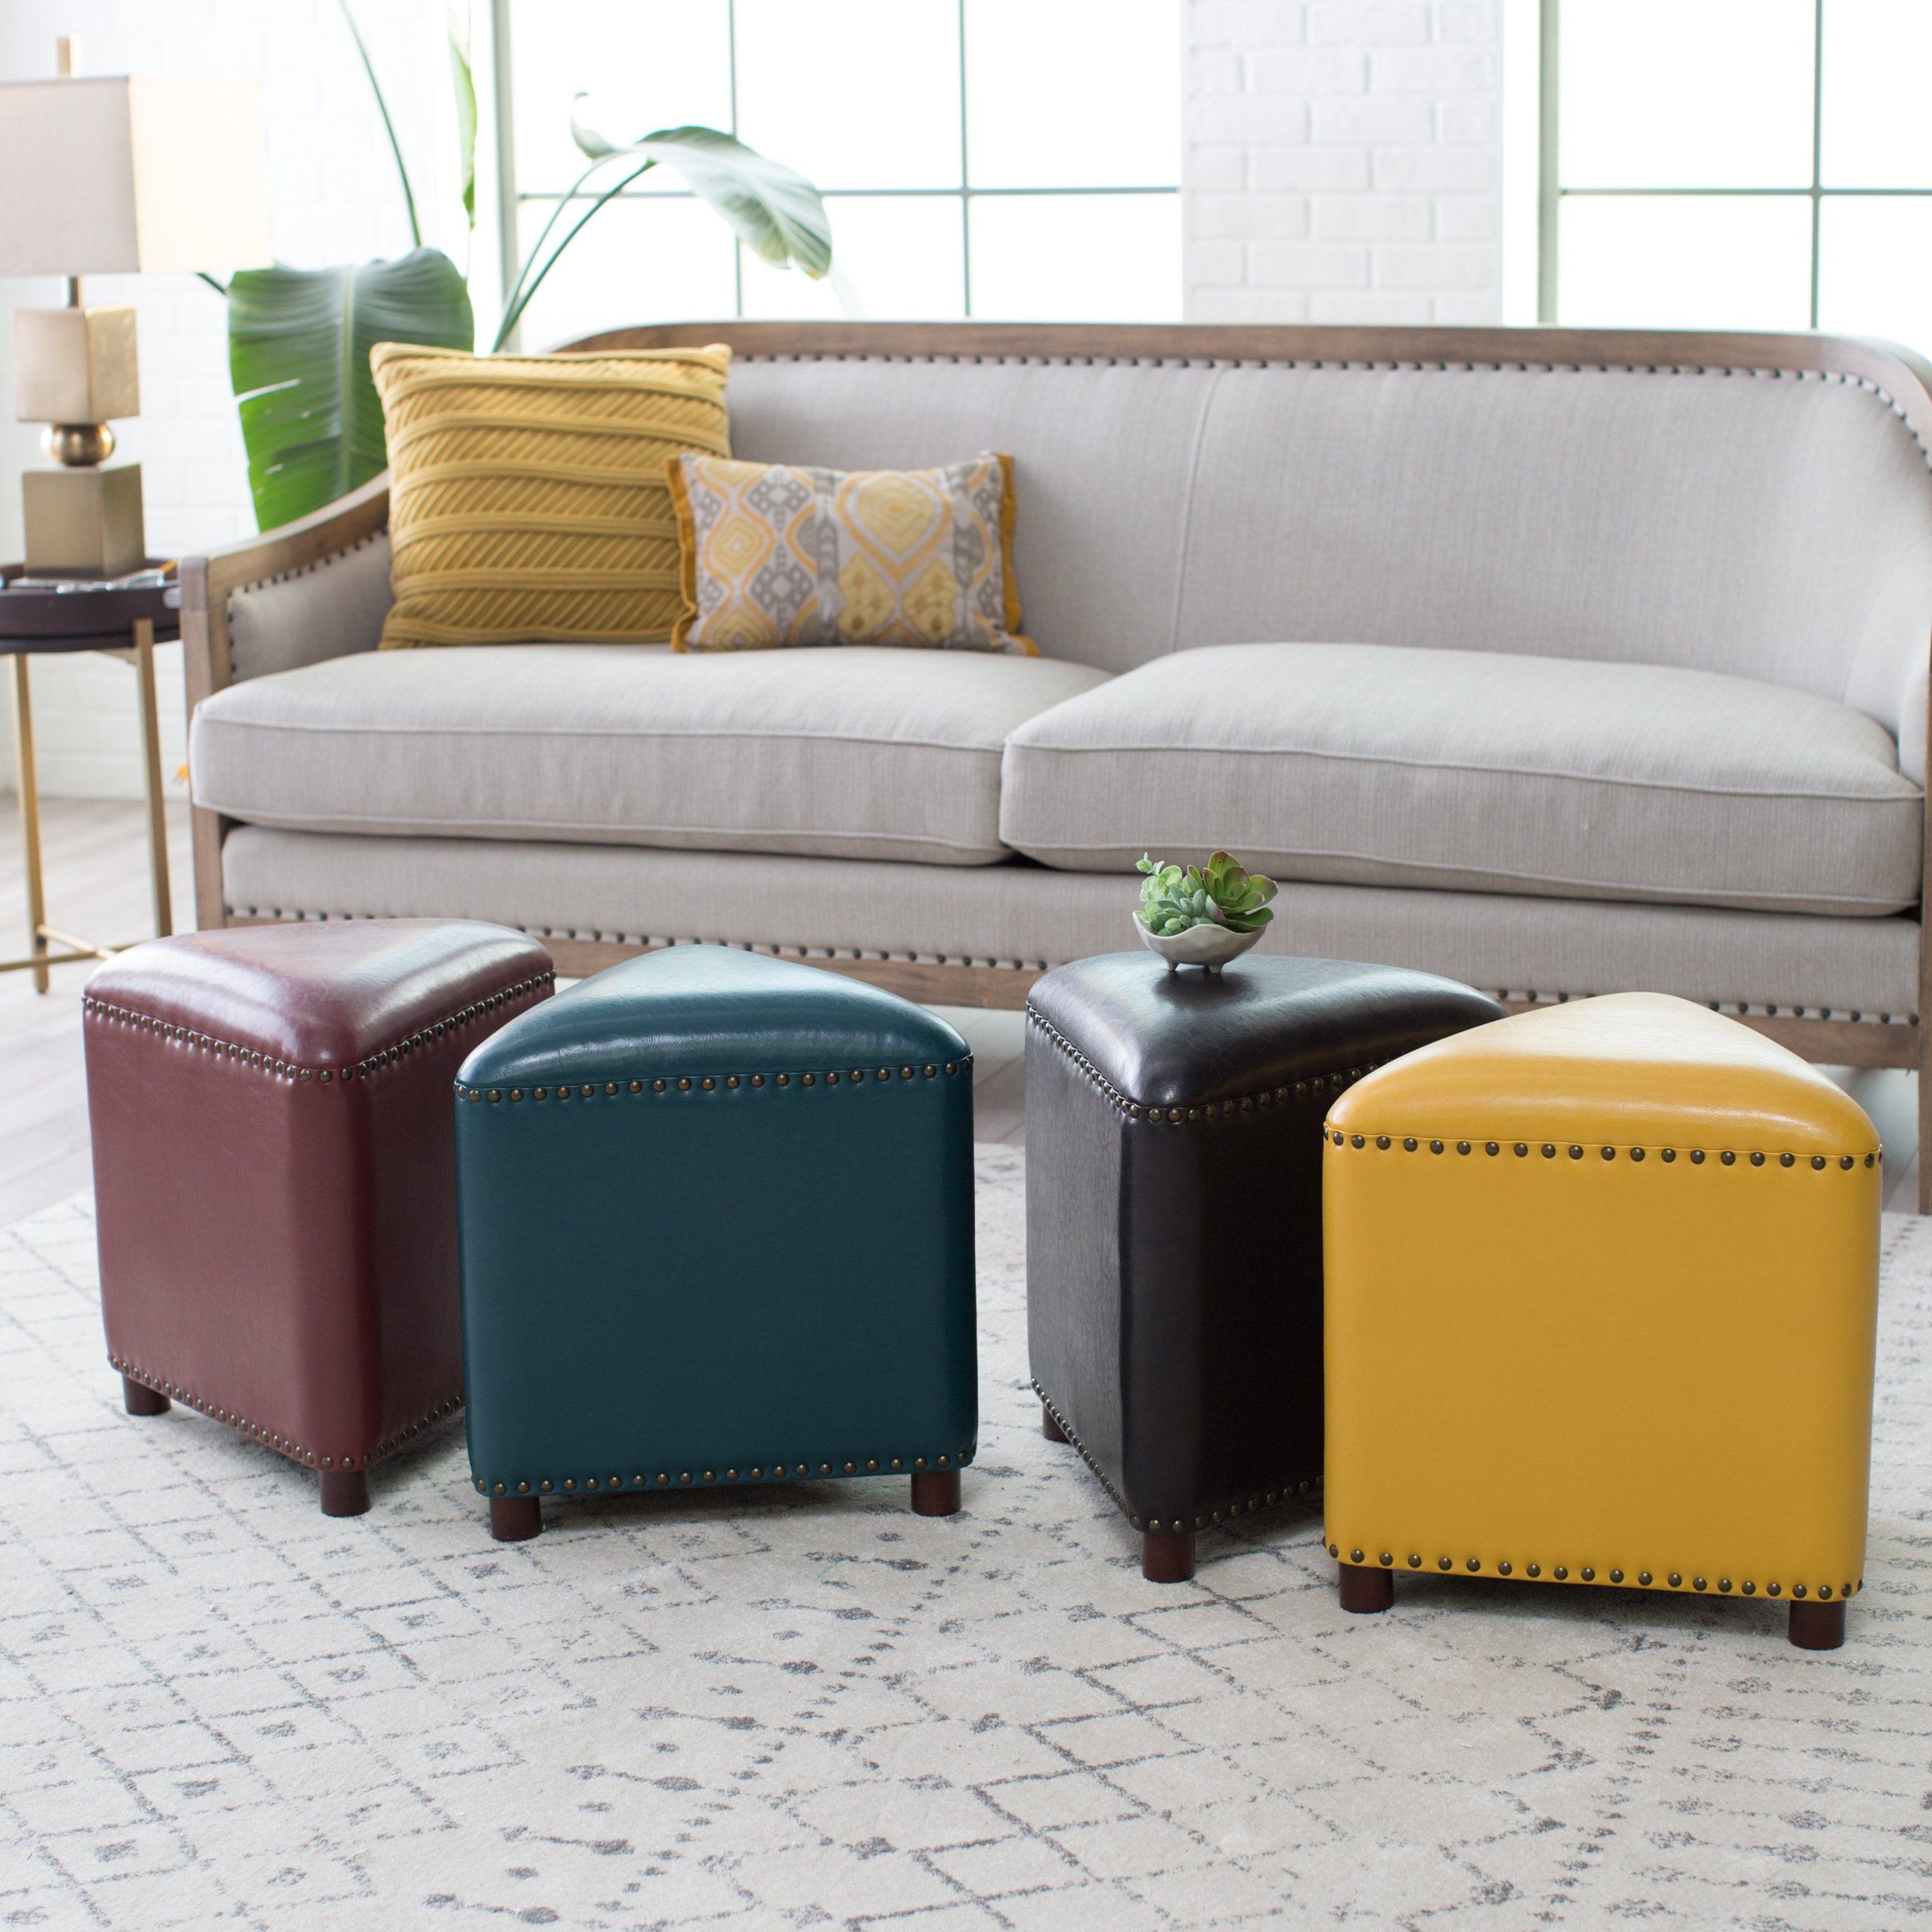 Belham Living Hutton Triangle Nailhead Ottoman | From Hayneedle For Round Gold Faux Leather Ottomans With Pull Tab (Gallery 20 of 20)